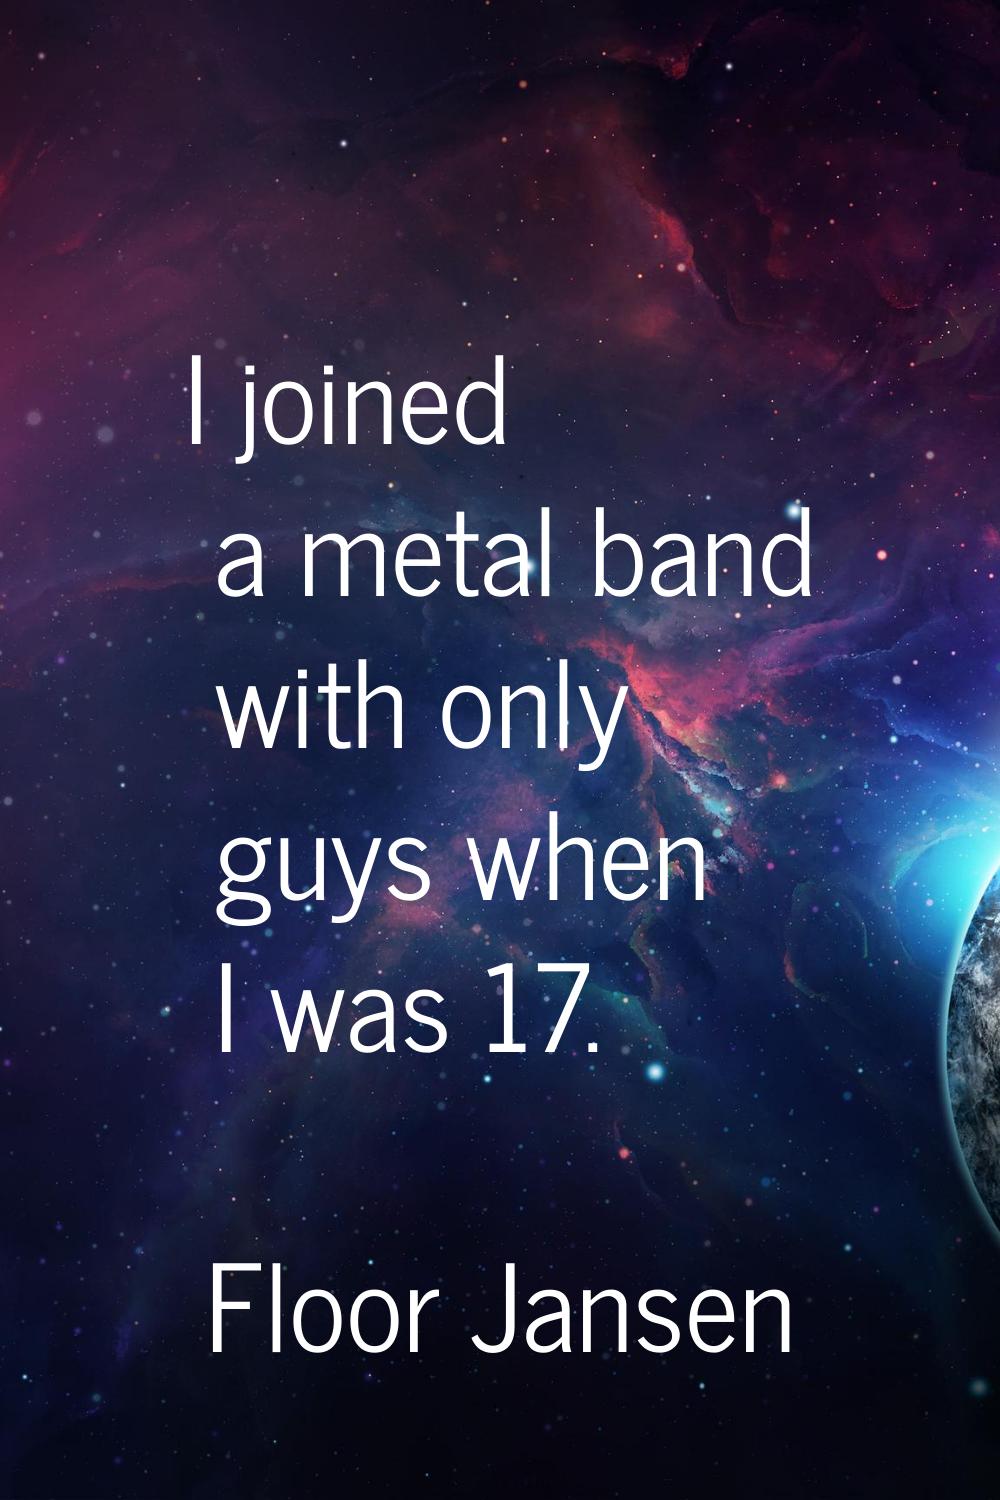 I joined a metal band with only guys when I was 17.